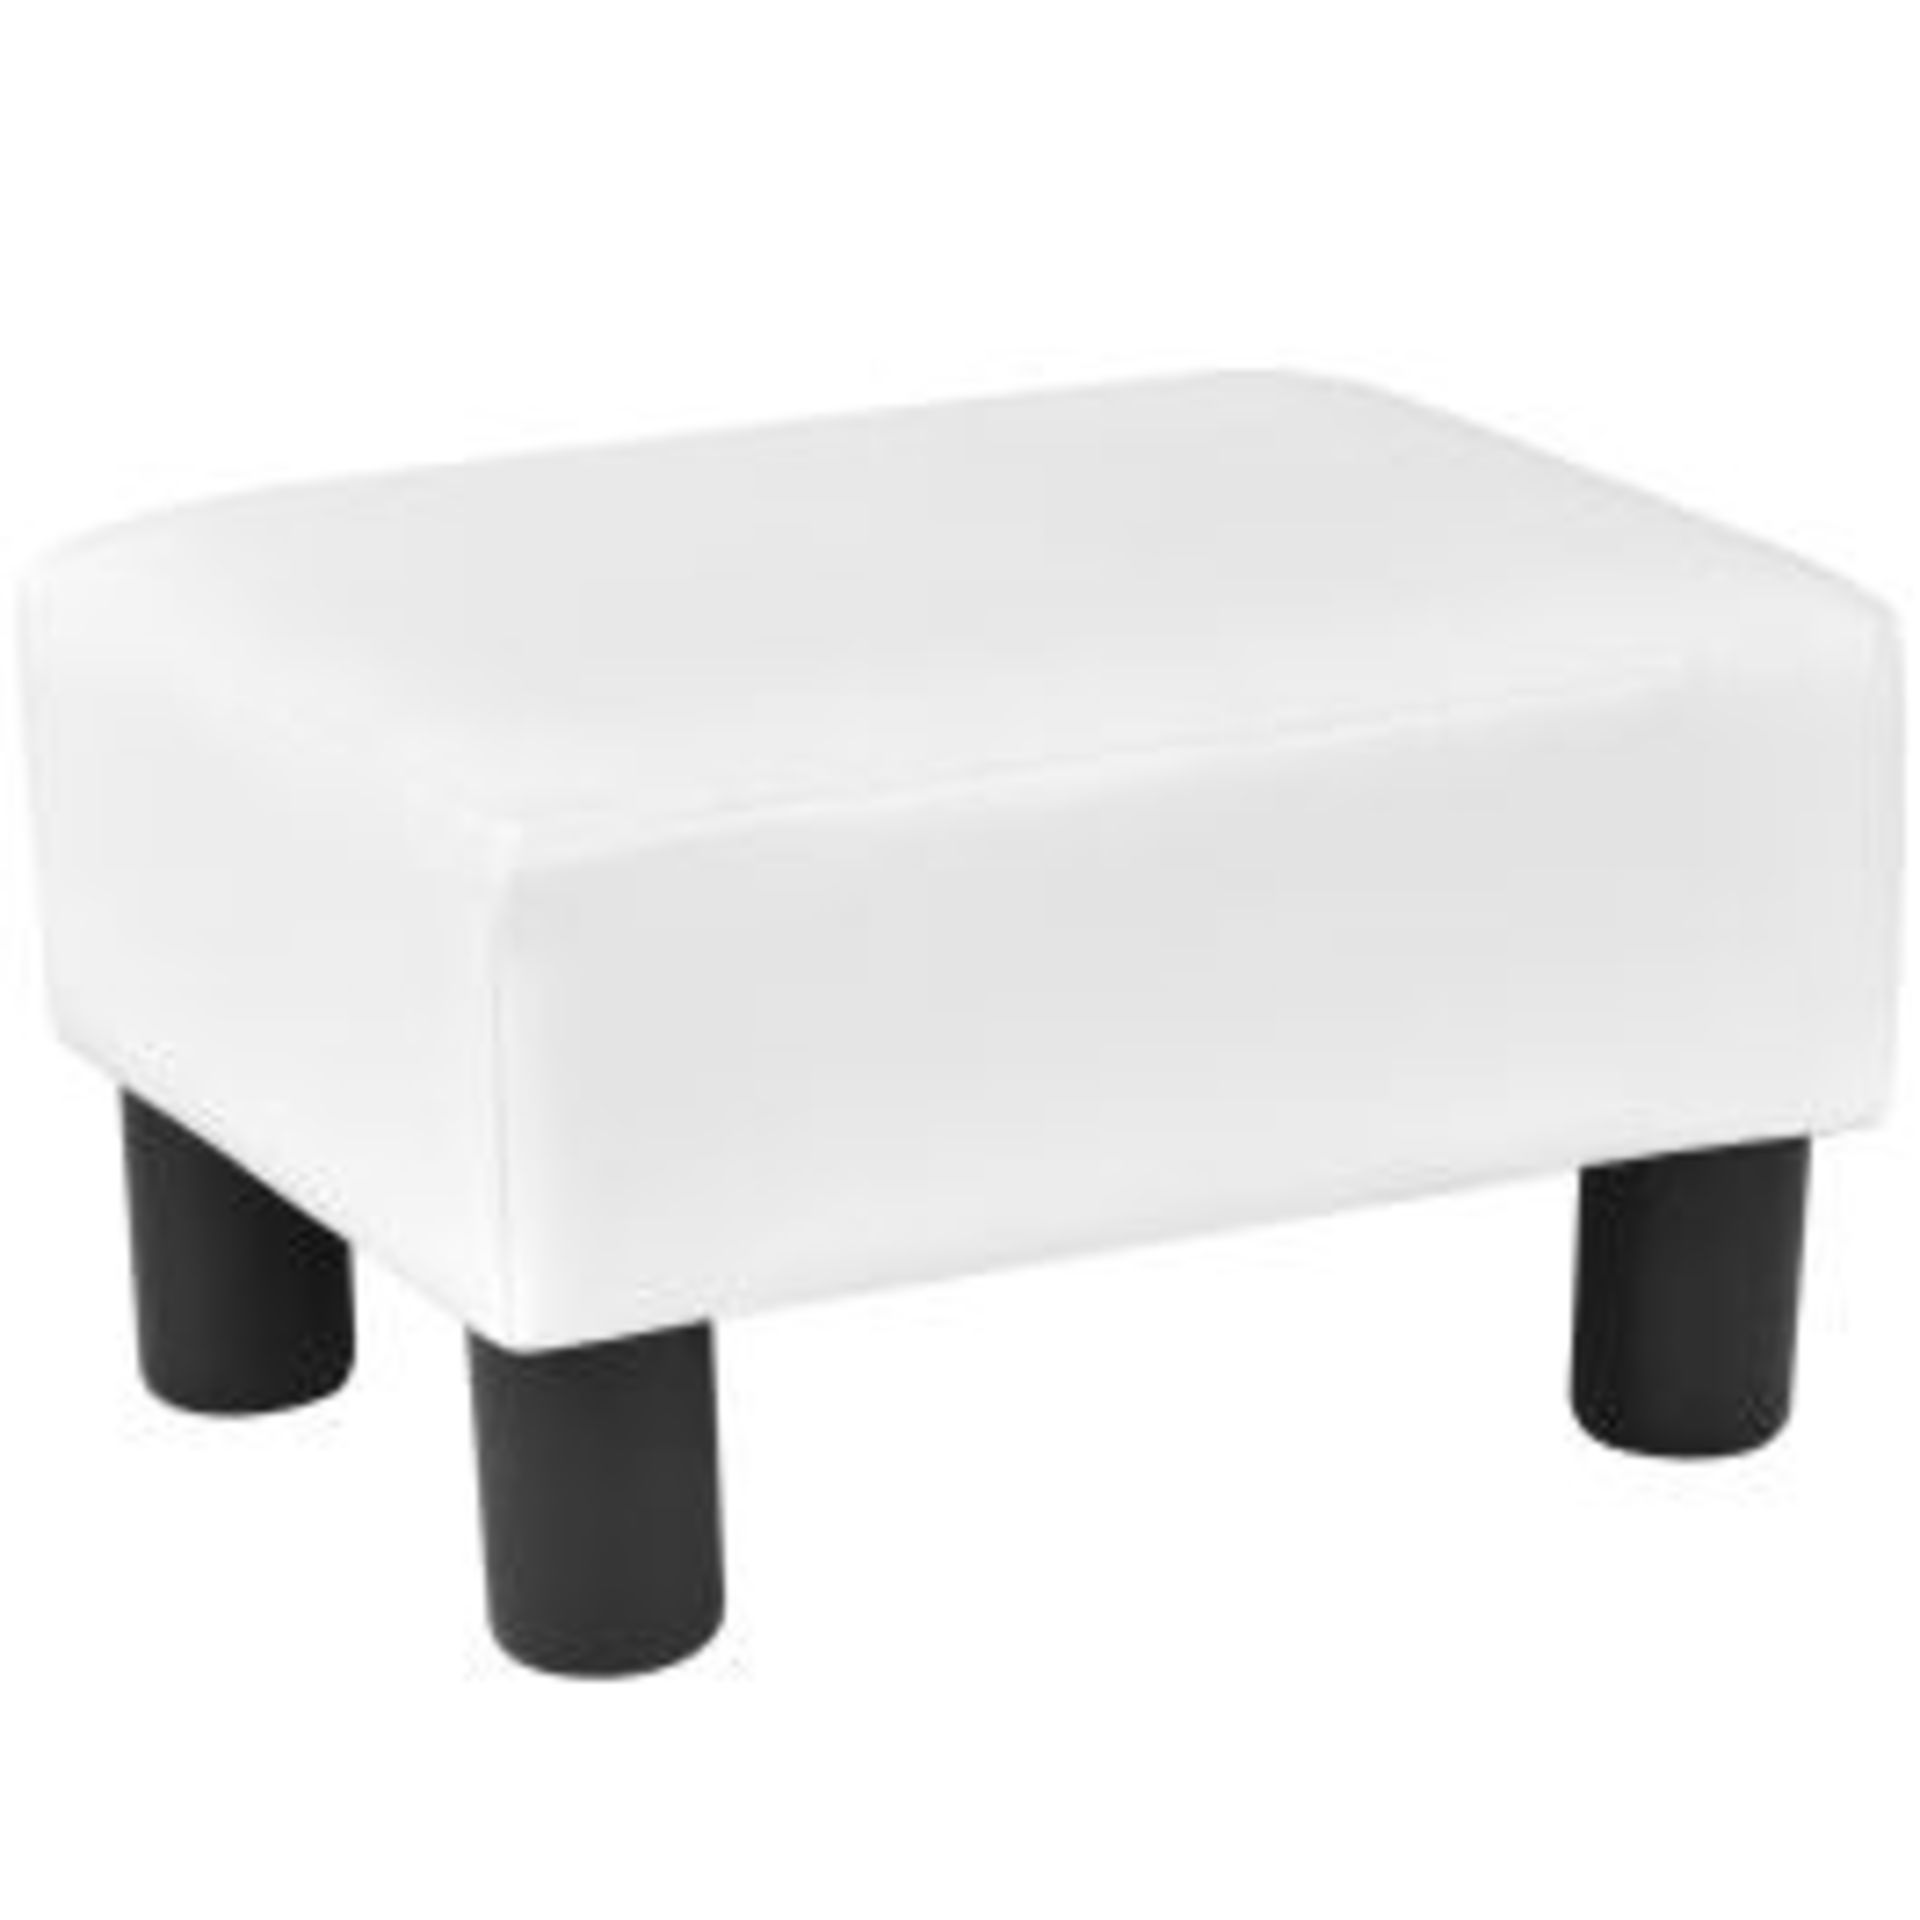 40 cm Rectangle PU Leather Small Footstool Ottoman-White - ER53